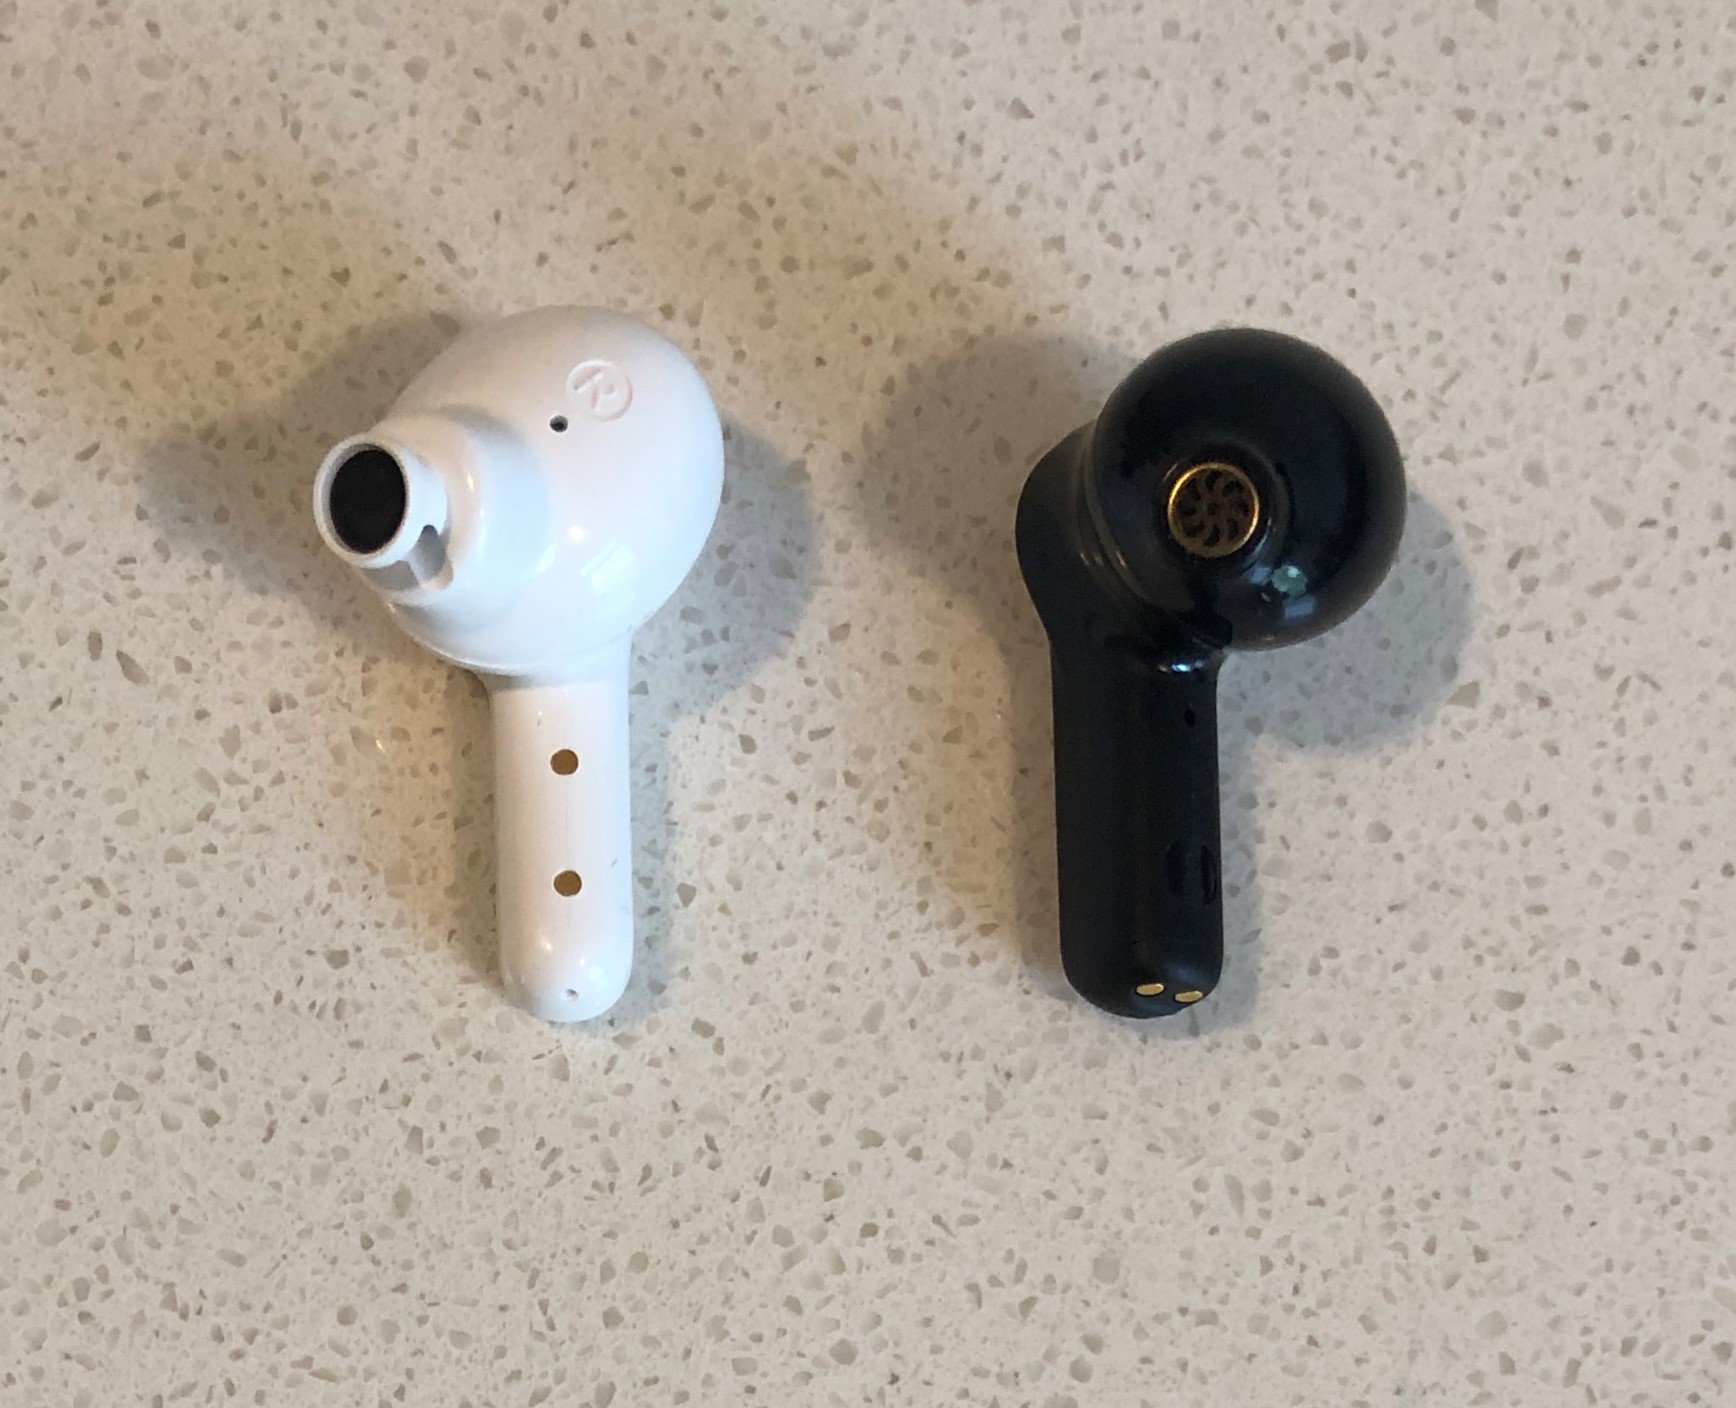 QCY T13 vs Soundcore Life P3i earbud front